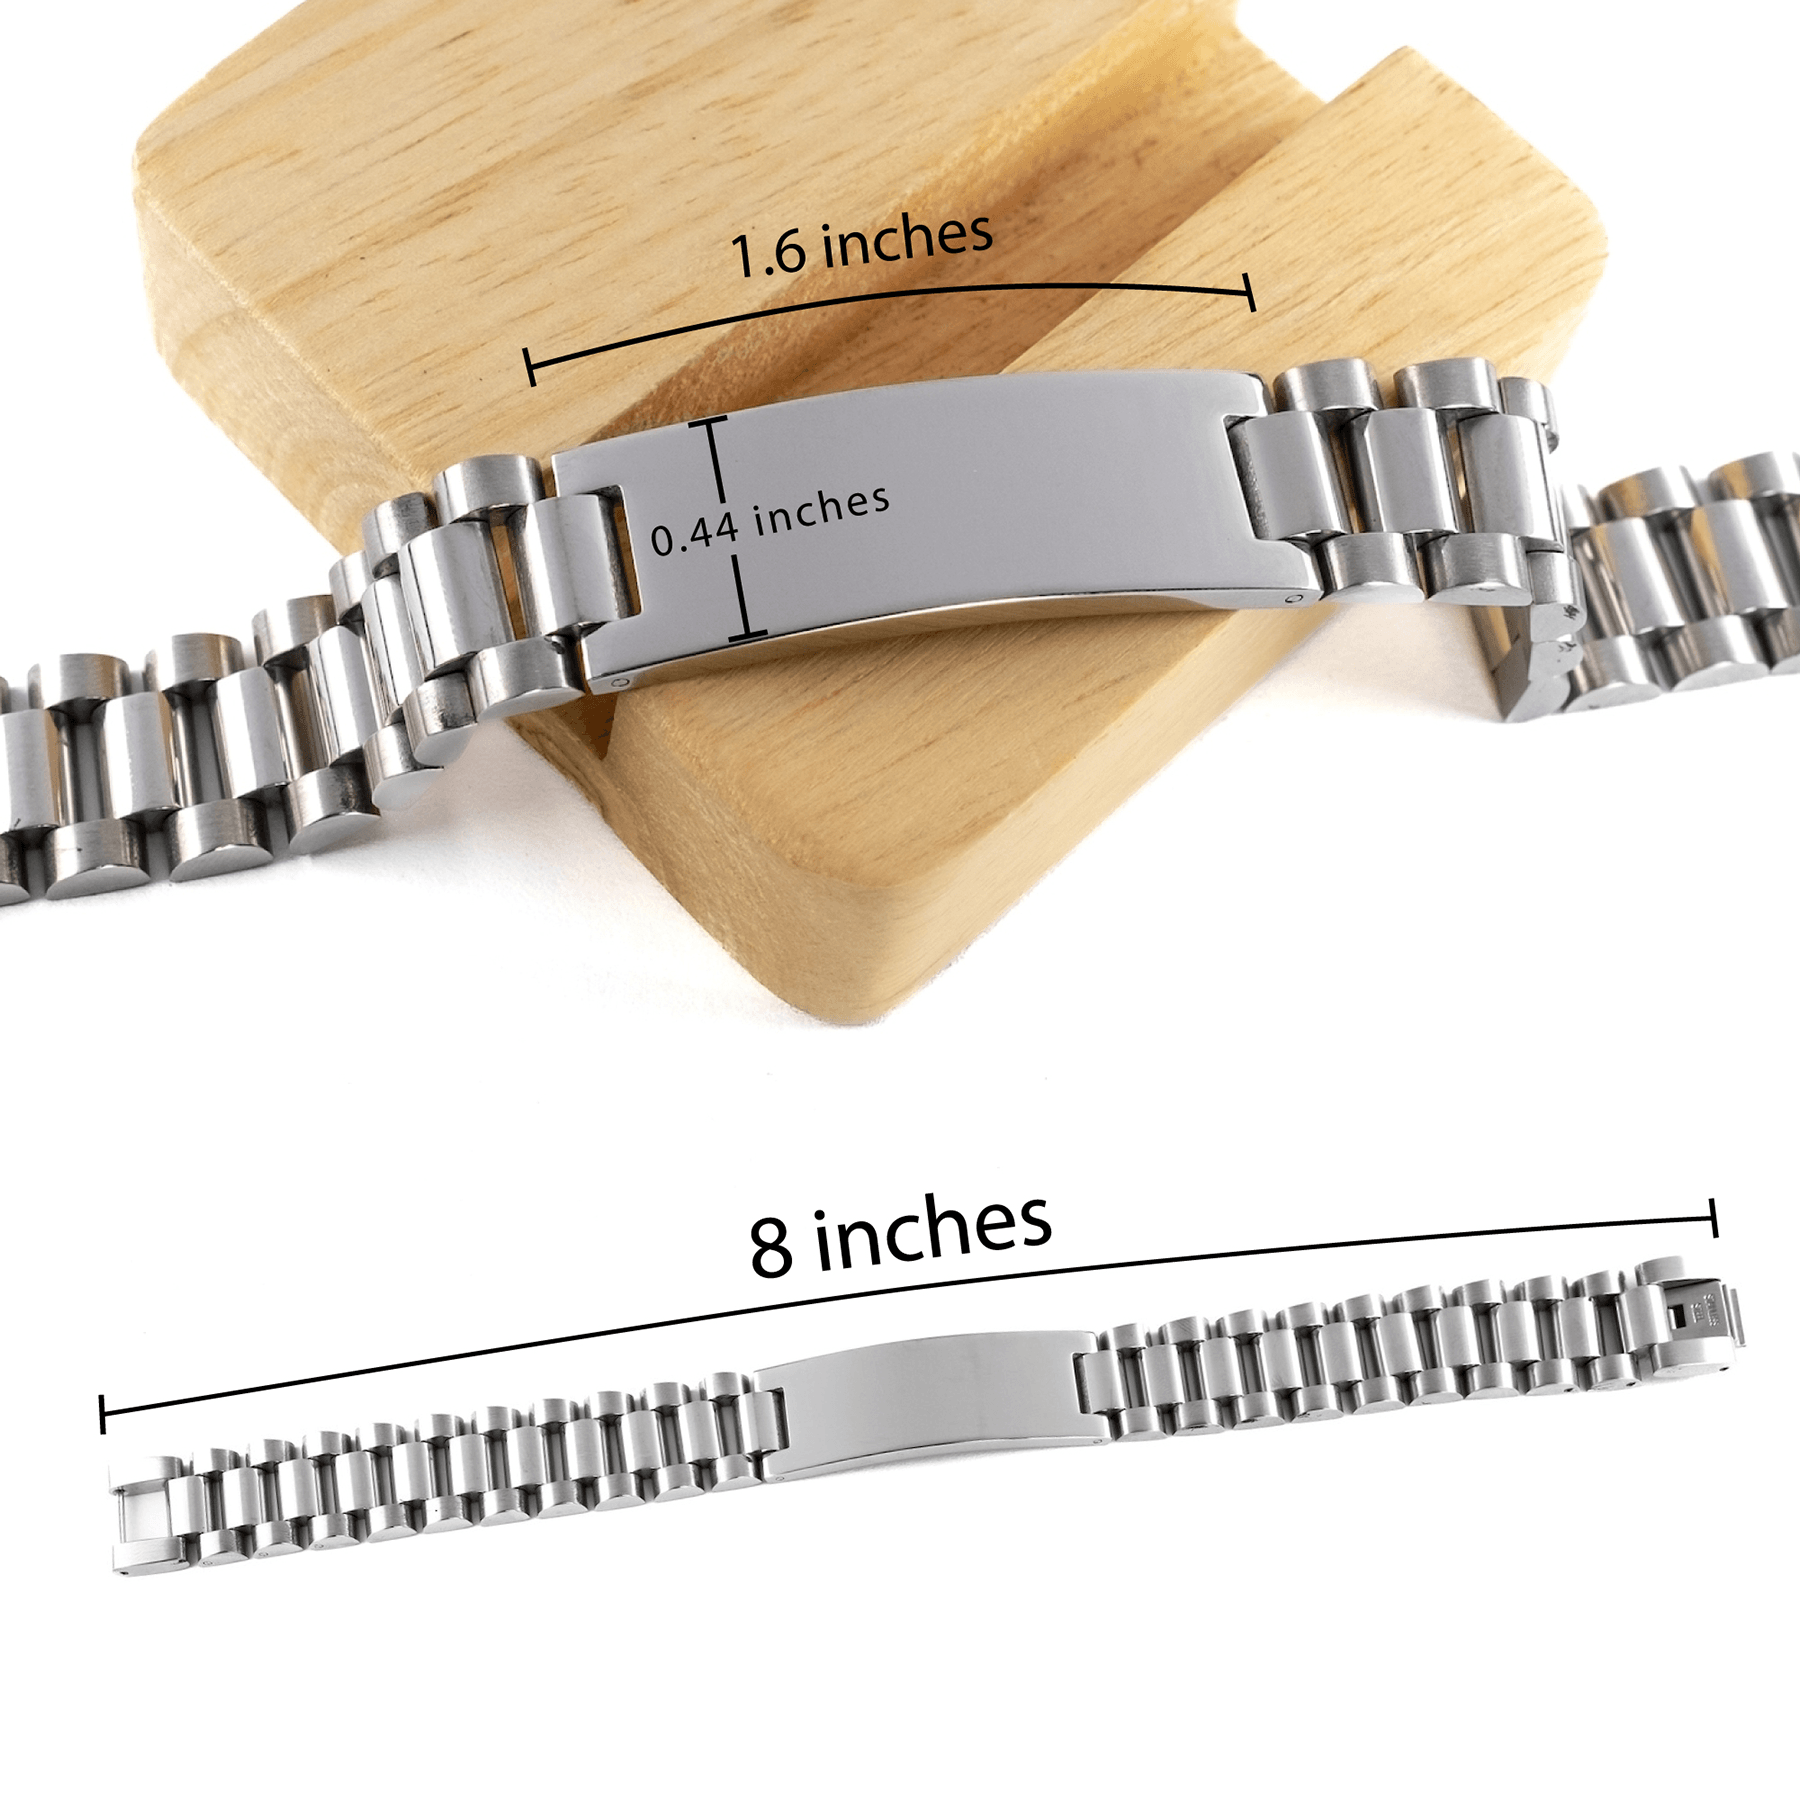 Medical Assistant Ladder Stainless Steel Engraved Bracelet - Thanks for being who you are - Birthday Christmas Jewelry Gifts Coworkers Colleague Boss - Mallard Moon Gift Shop